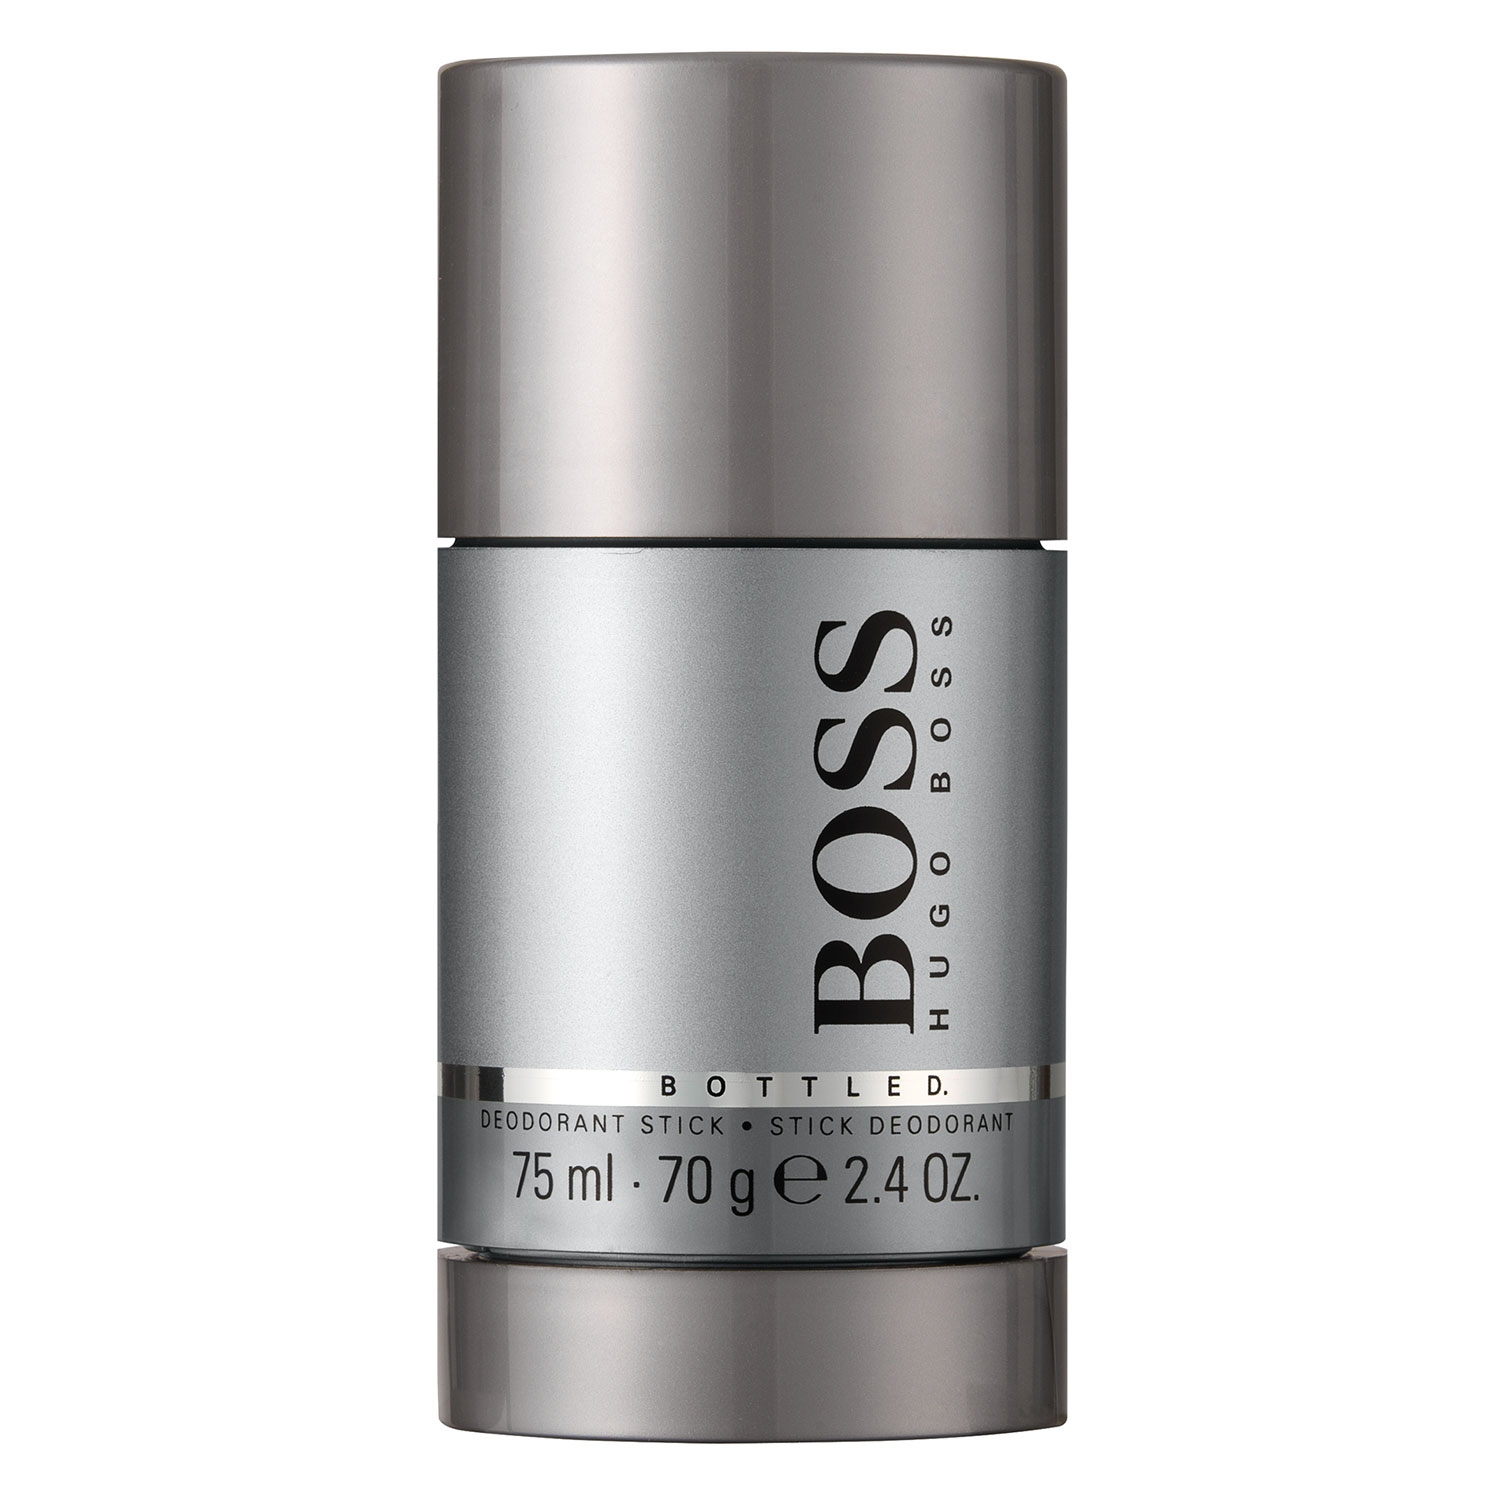 Product image from Boss Bottled - Deodorant Stick